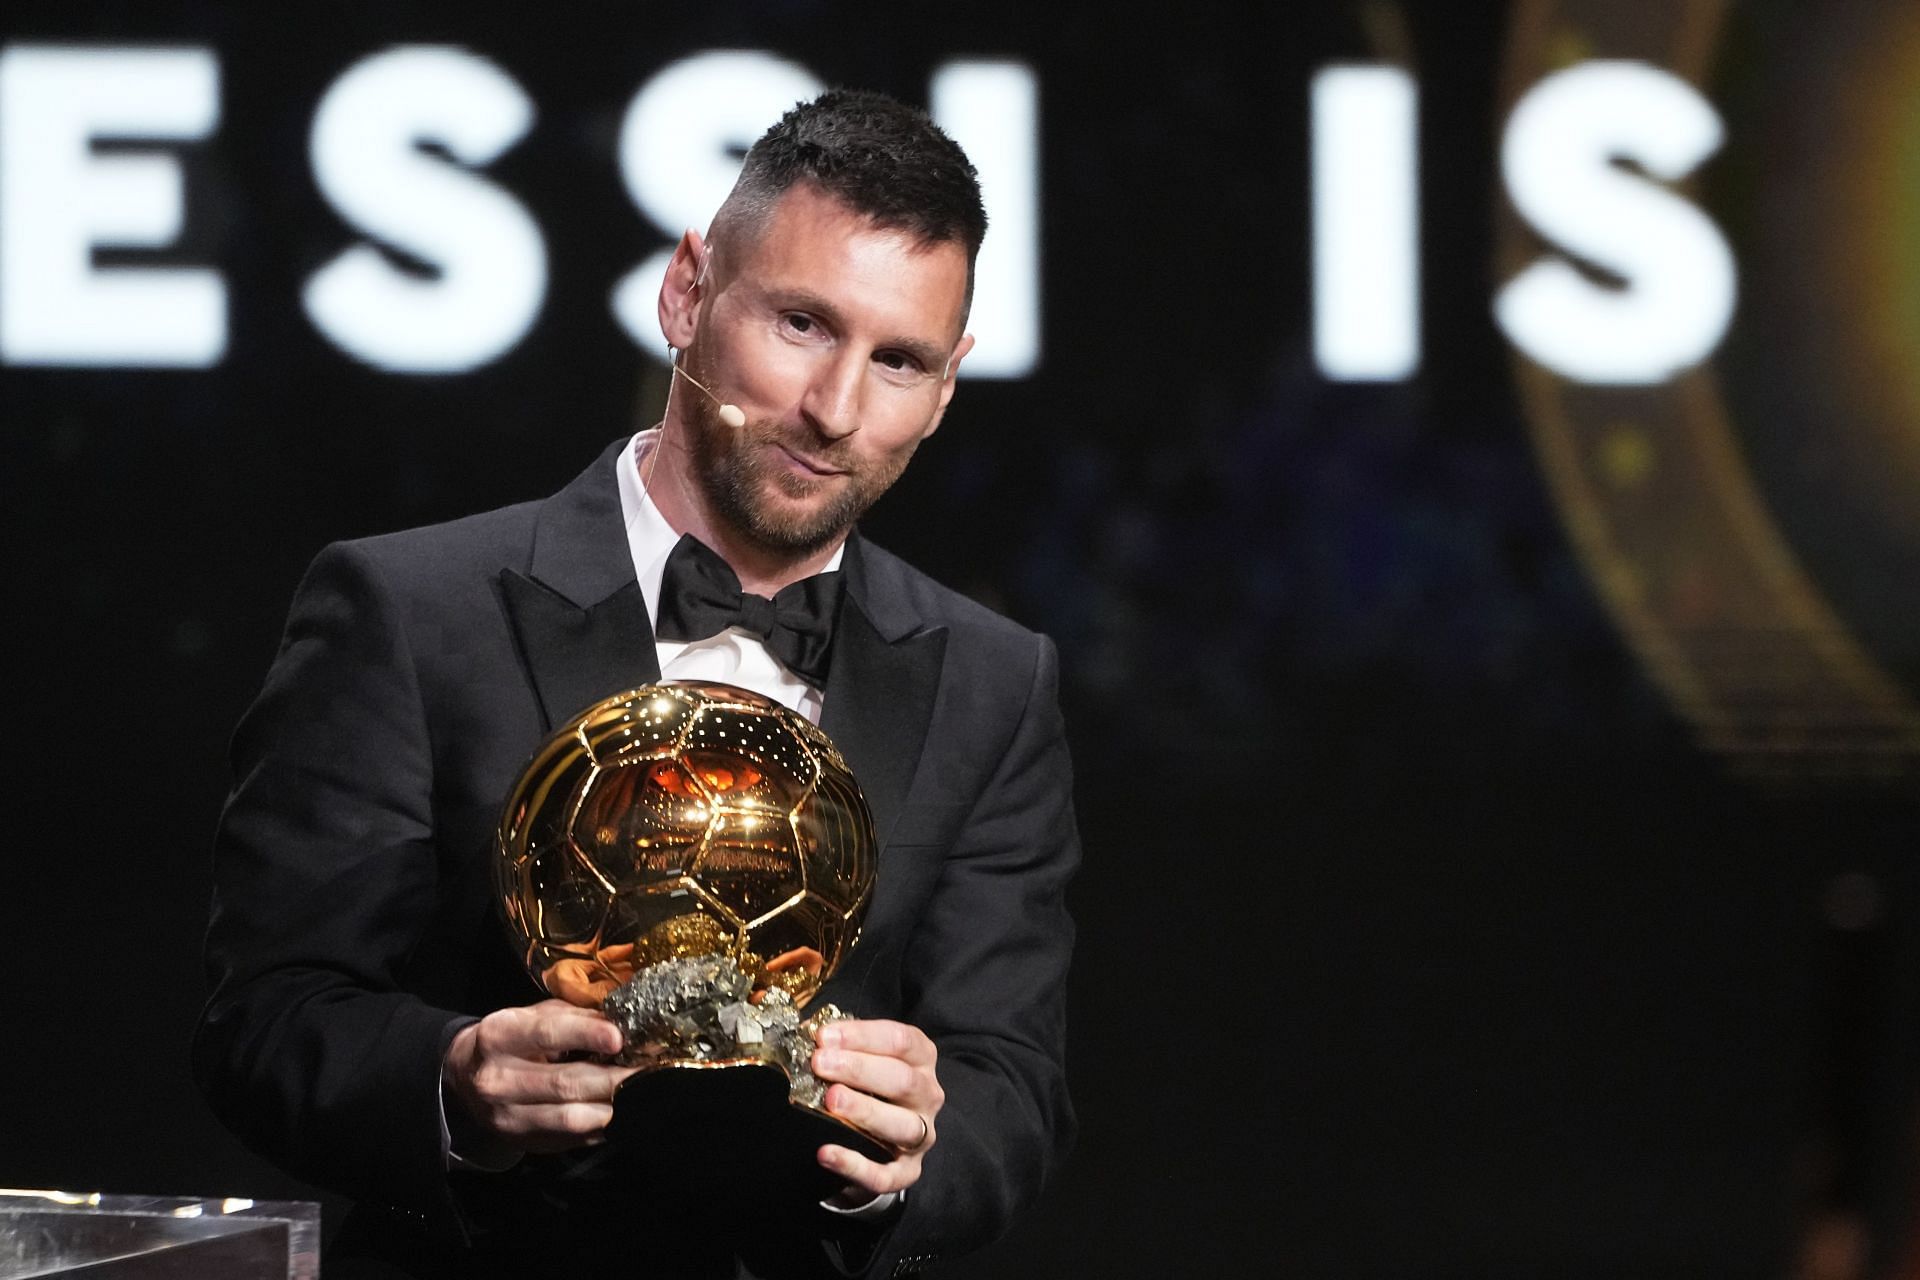 The 36-year-old lifted the Ballon d'Or for the eighth time.